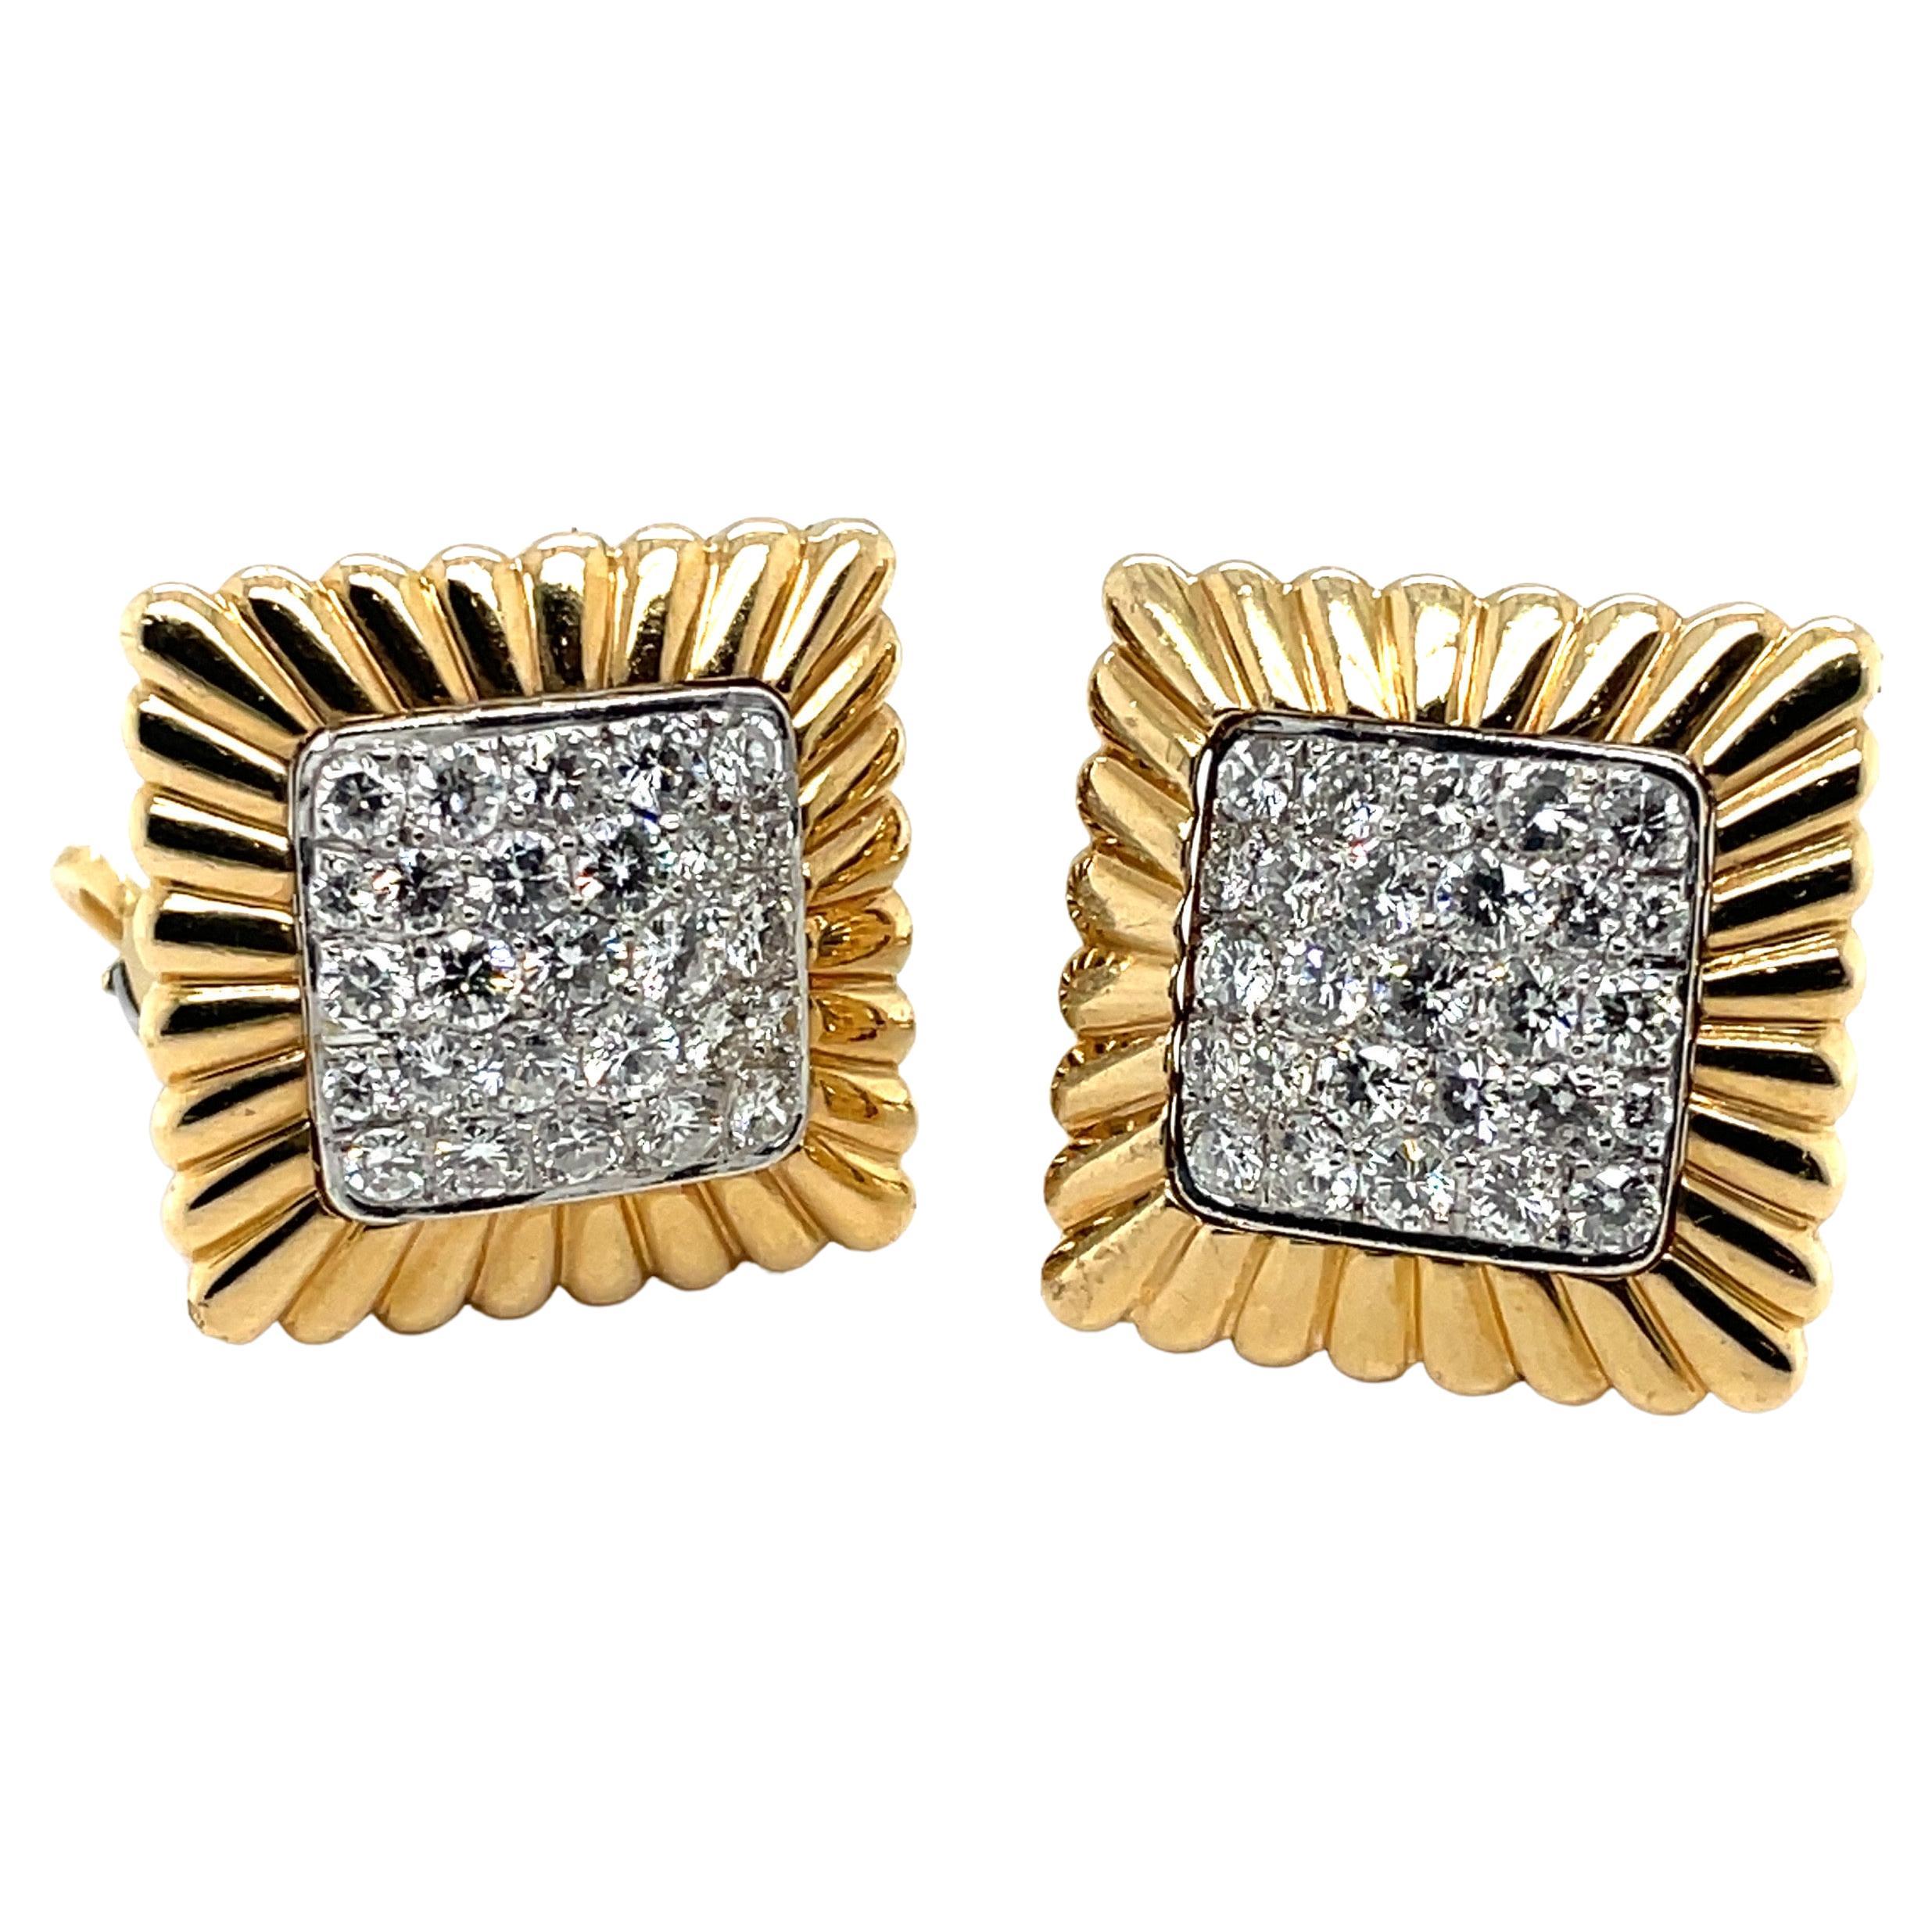 Glamorous pair of 18 karat yellow and white gold diamond earrings, circa 1960s.

Delightful, slightly bombé ear clips, each centering upon a square pavé-set with 25 brilliant-cut diamonds in different sizes totalling circa 5 carats, surrounded by a